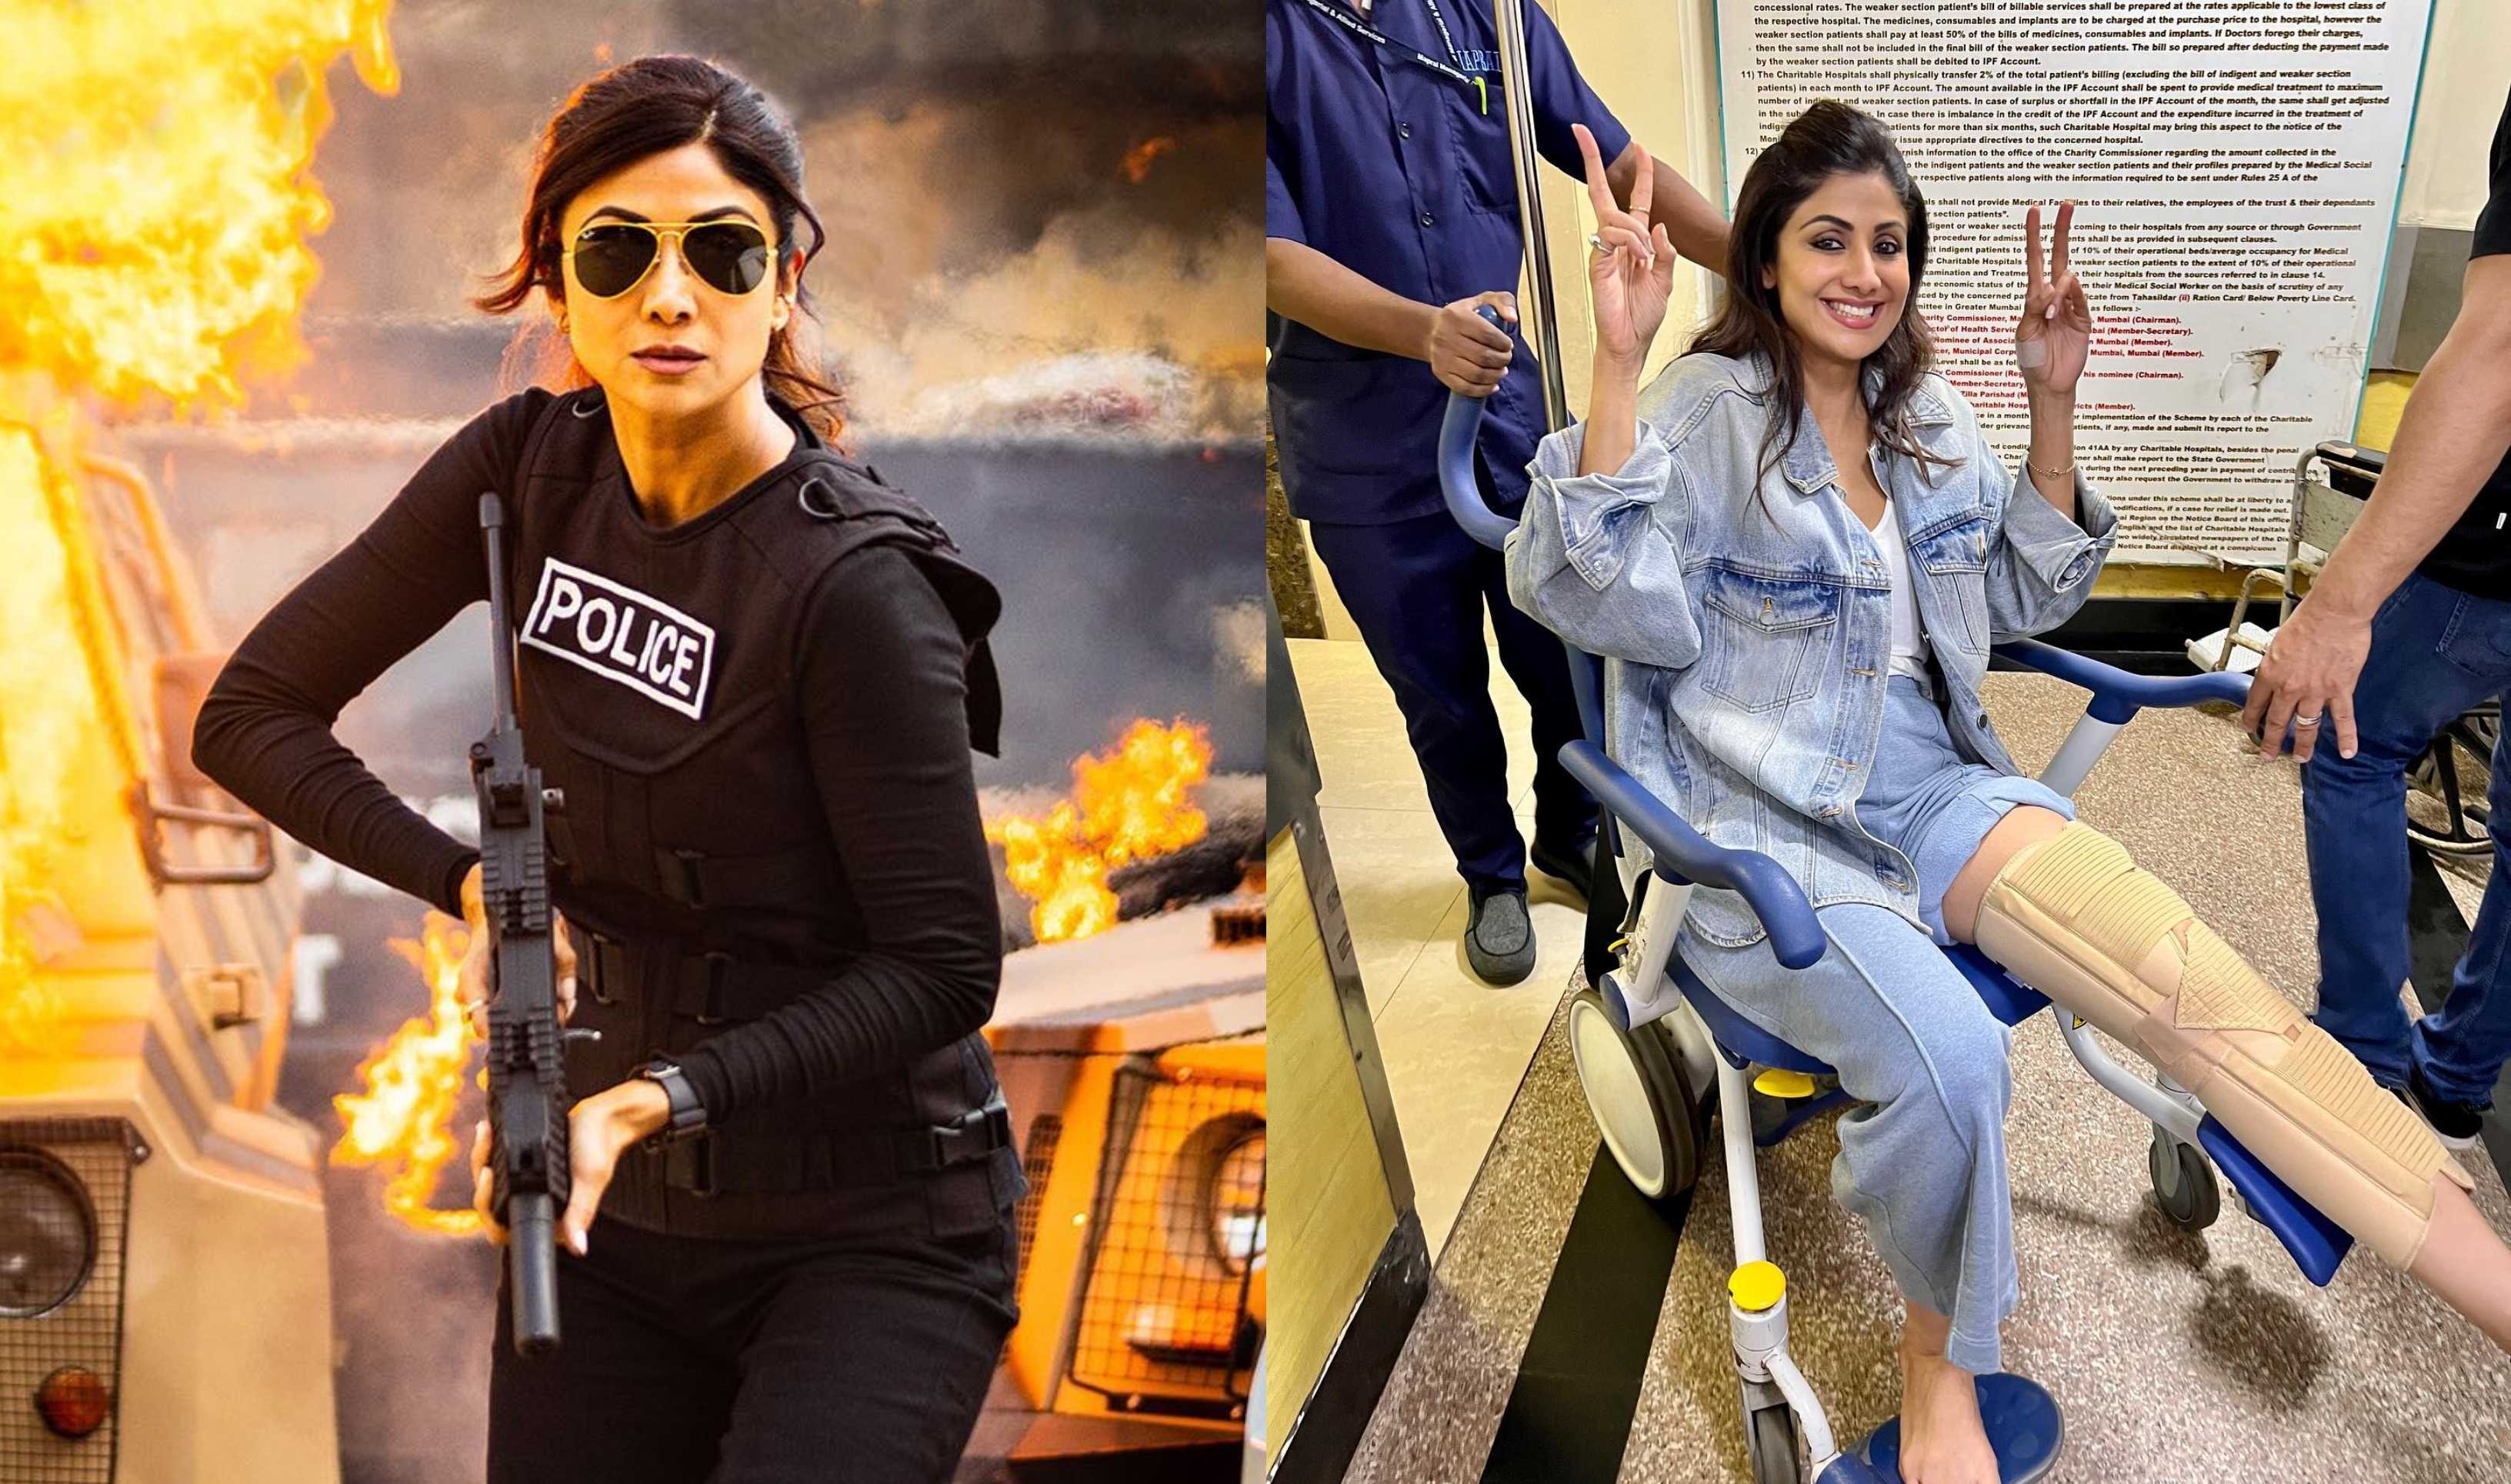 Shilpa Shetty injured while shooting action scenes for Rohit Shetty’s Indian Police Force; smiles through the pain